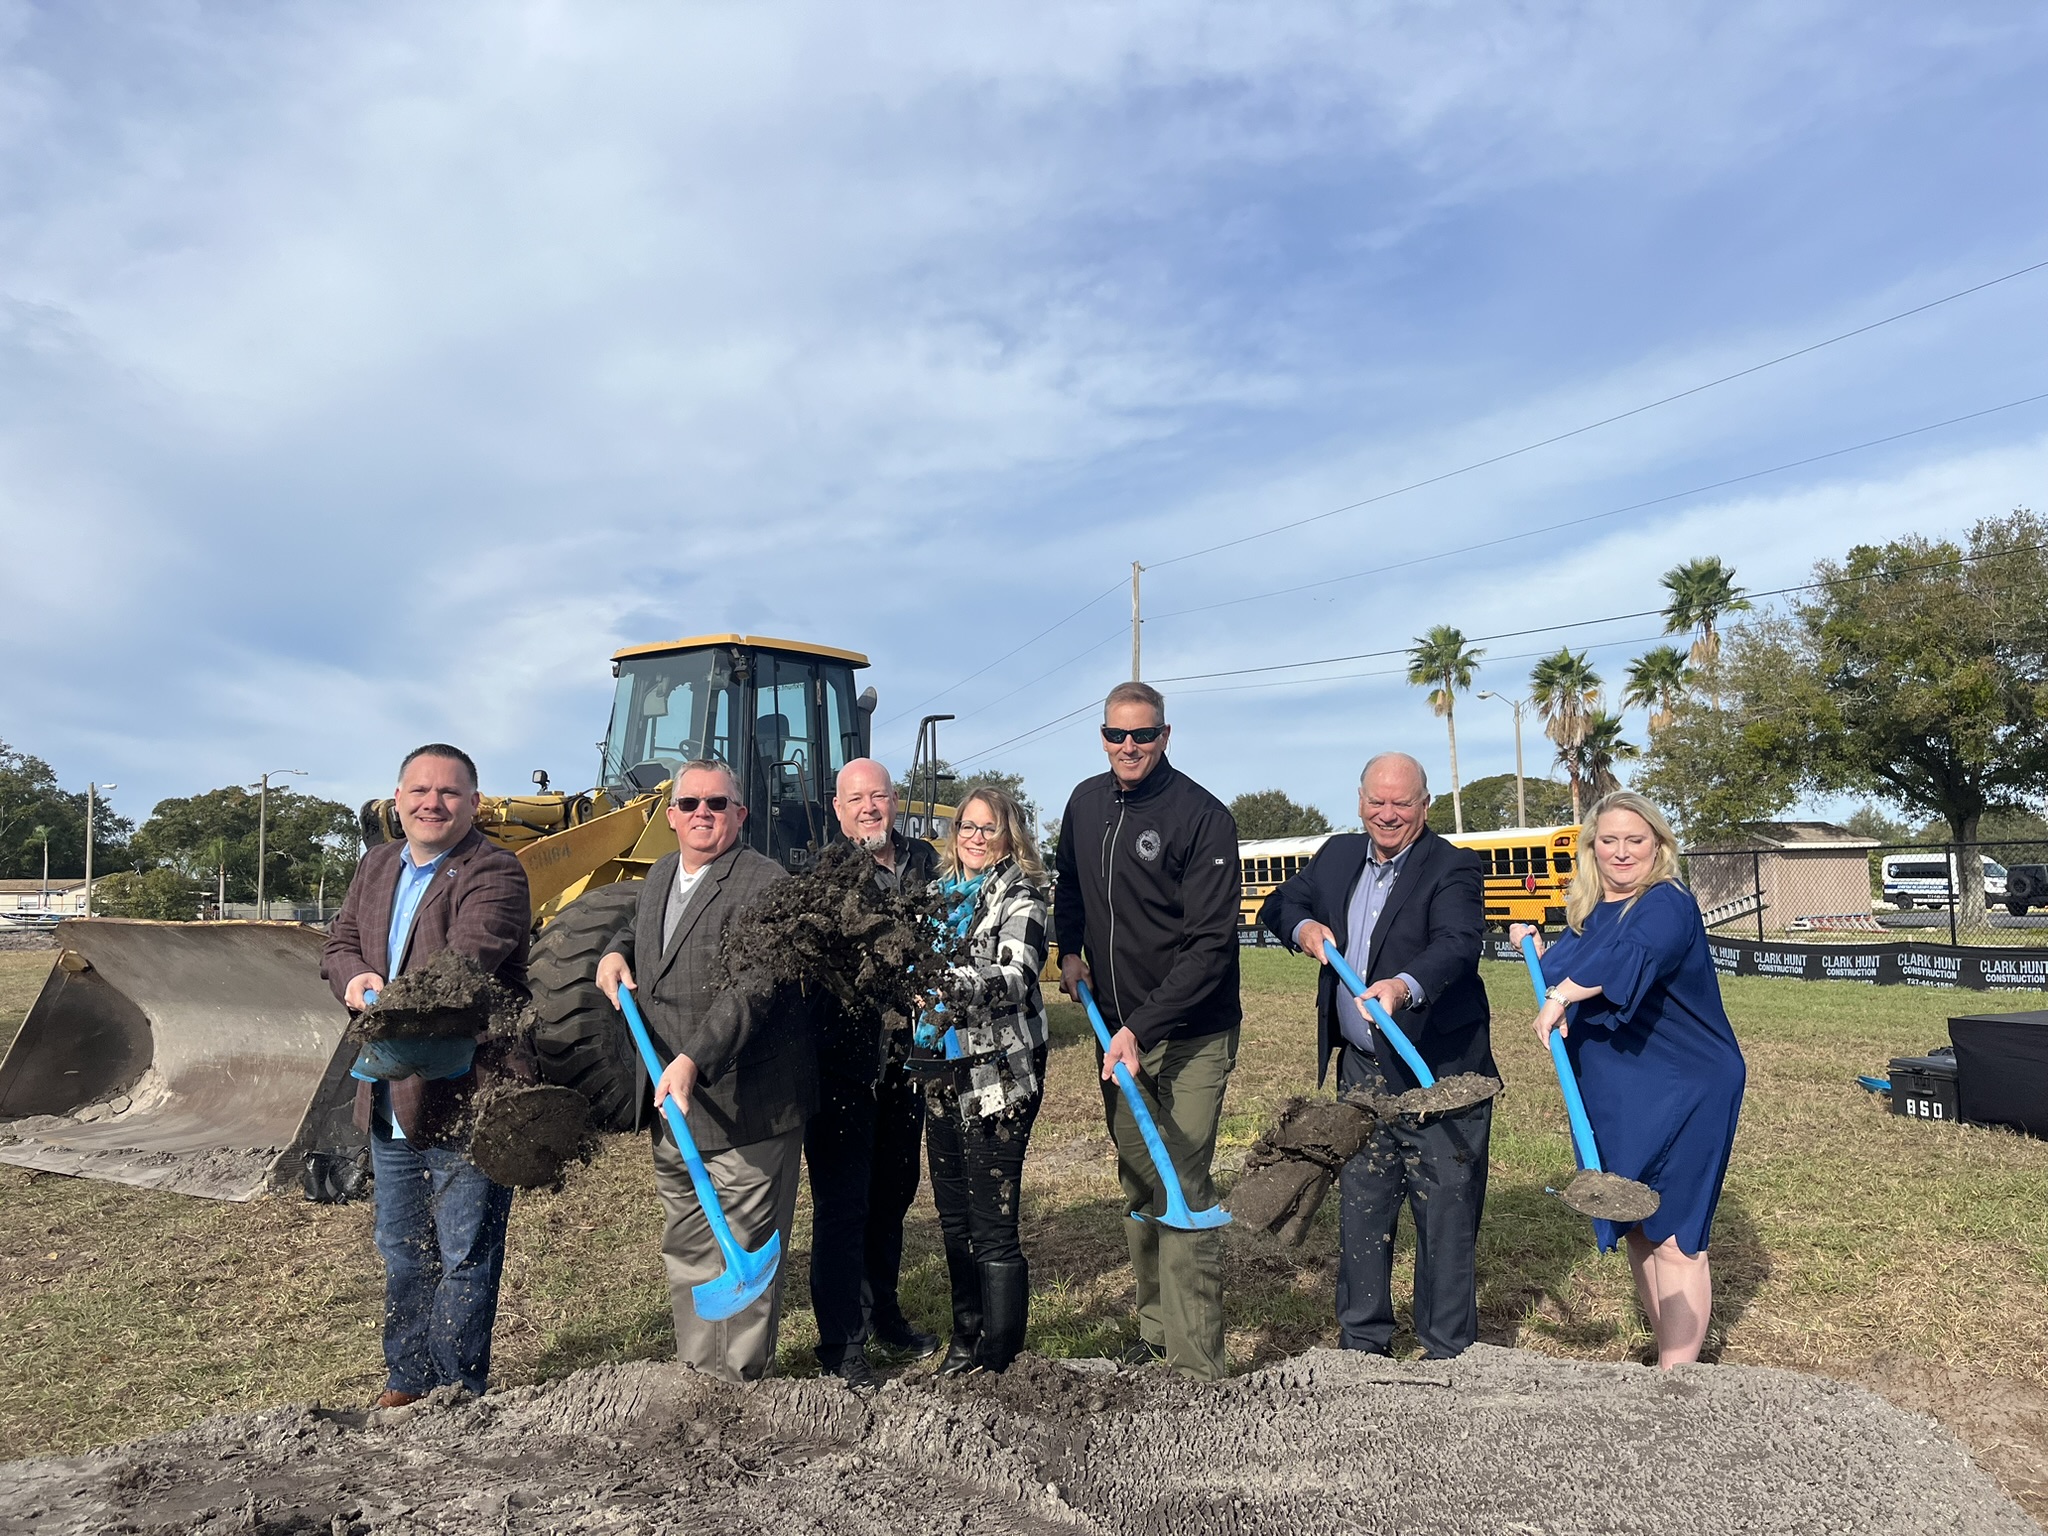 10 Tampa Bay: Work begins on Habitat for Humanity's new townhome development in Largo